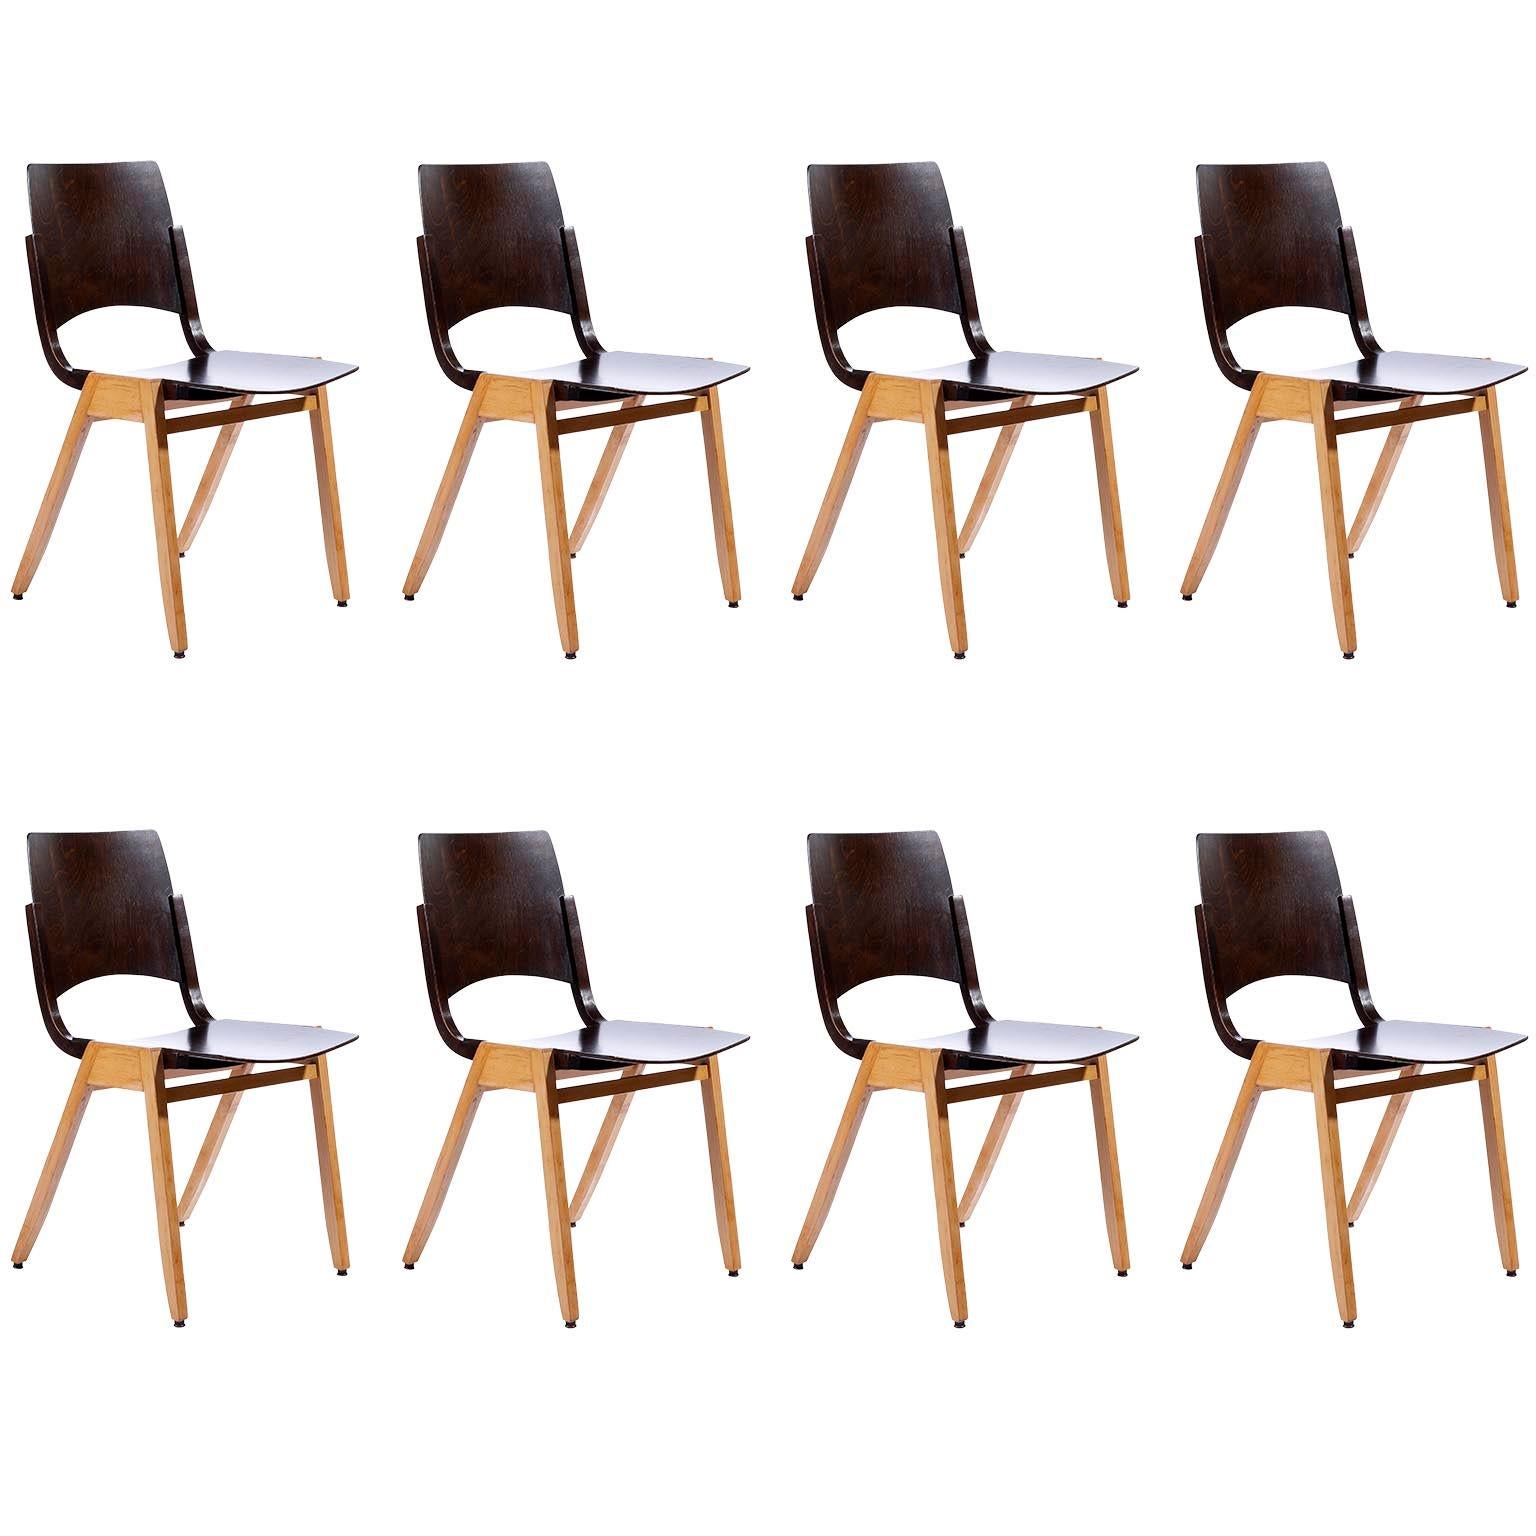 Roland Rainer, Set of Eight Stacking Chairs P7, Bicolored Beech, Austria, 1952